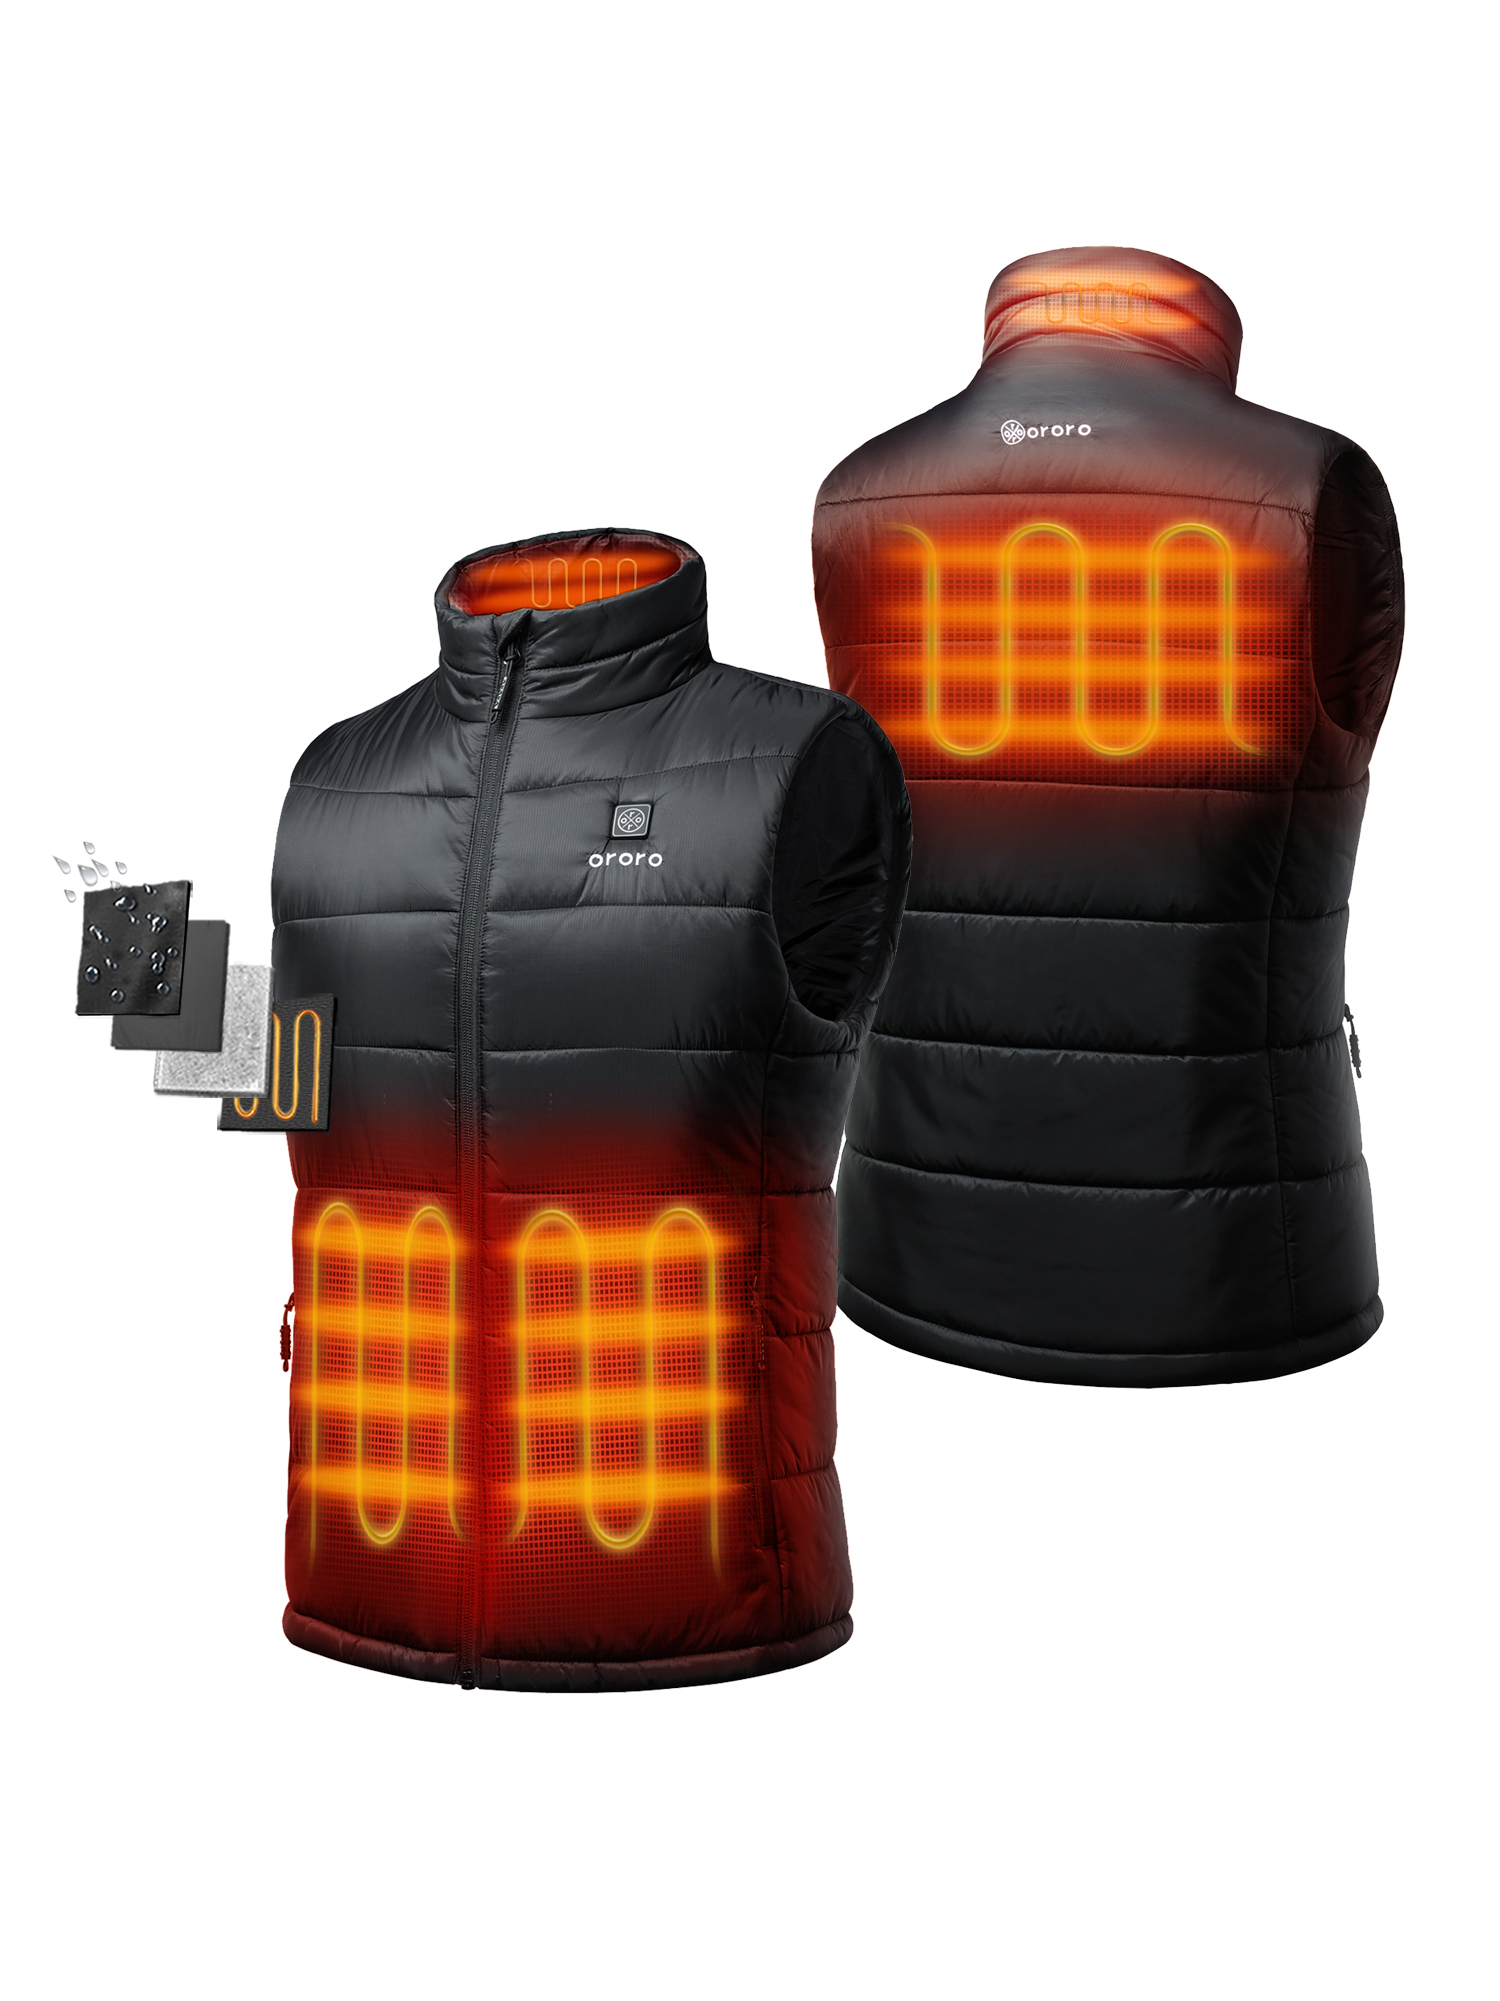 ORORO Men's Heated Vest with Battery, Heating Vest for Hiking Skiing Outdoors (Black, XL) - image 2 of 11